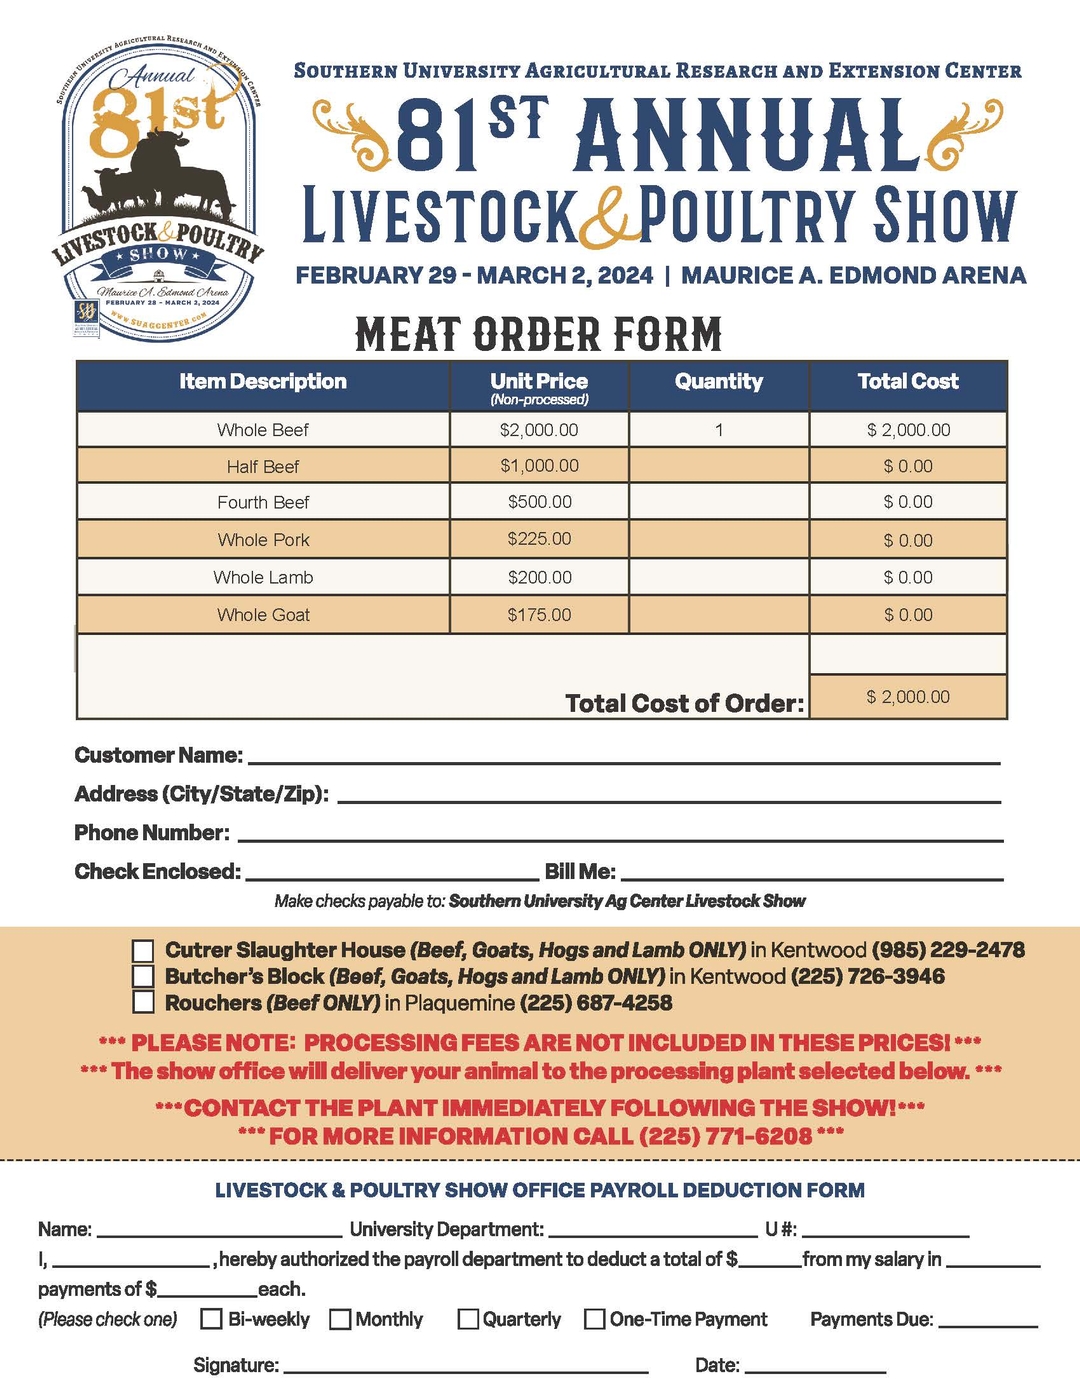 SU Ag Center 81st Annual Livestock and Poultry Show Meat Order Form